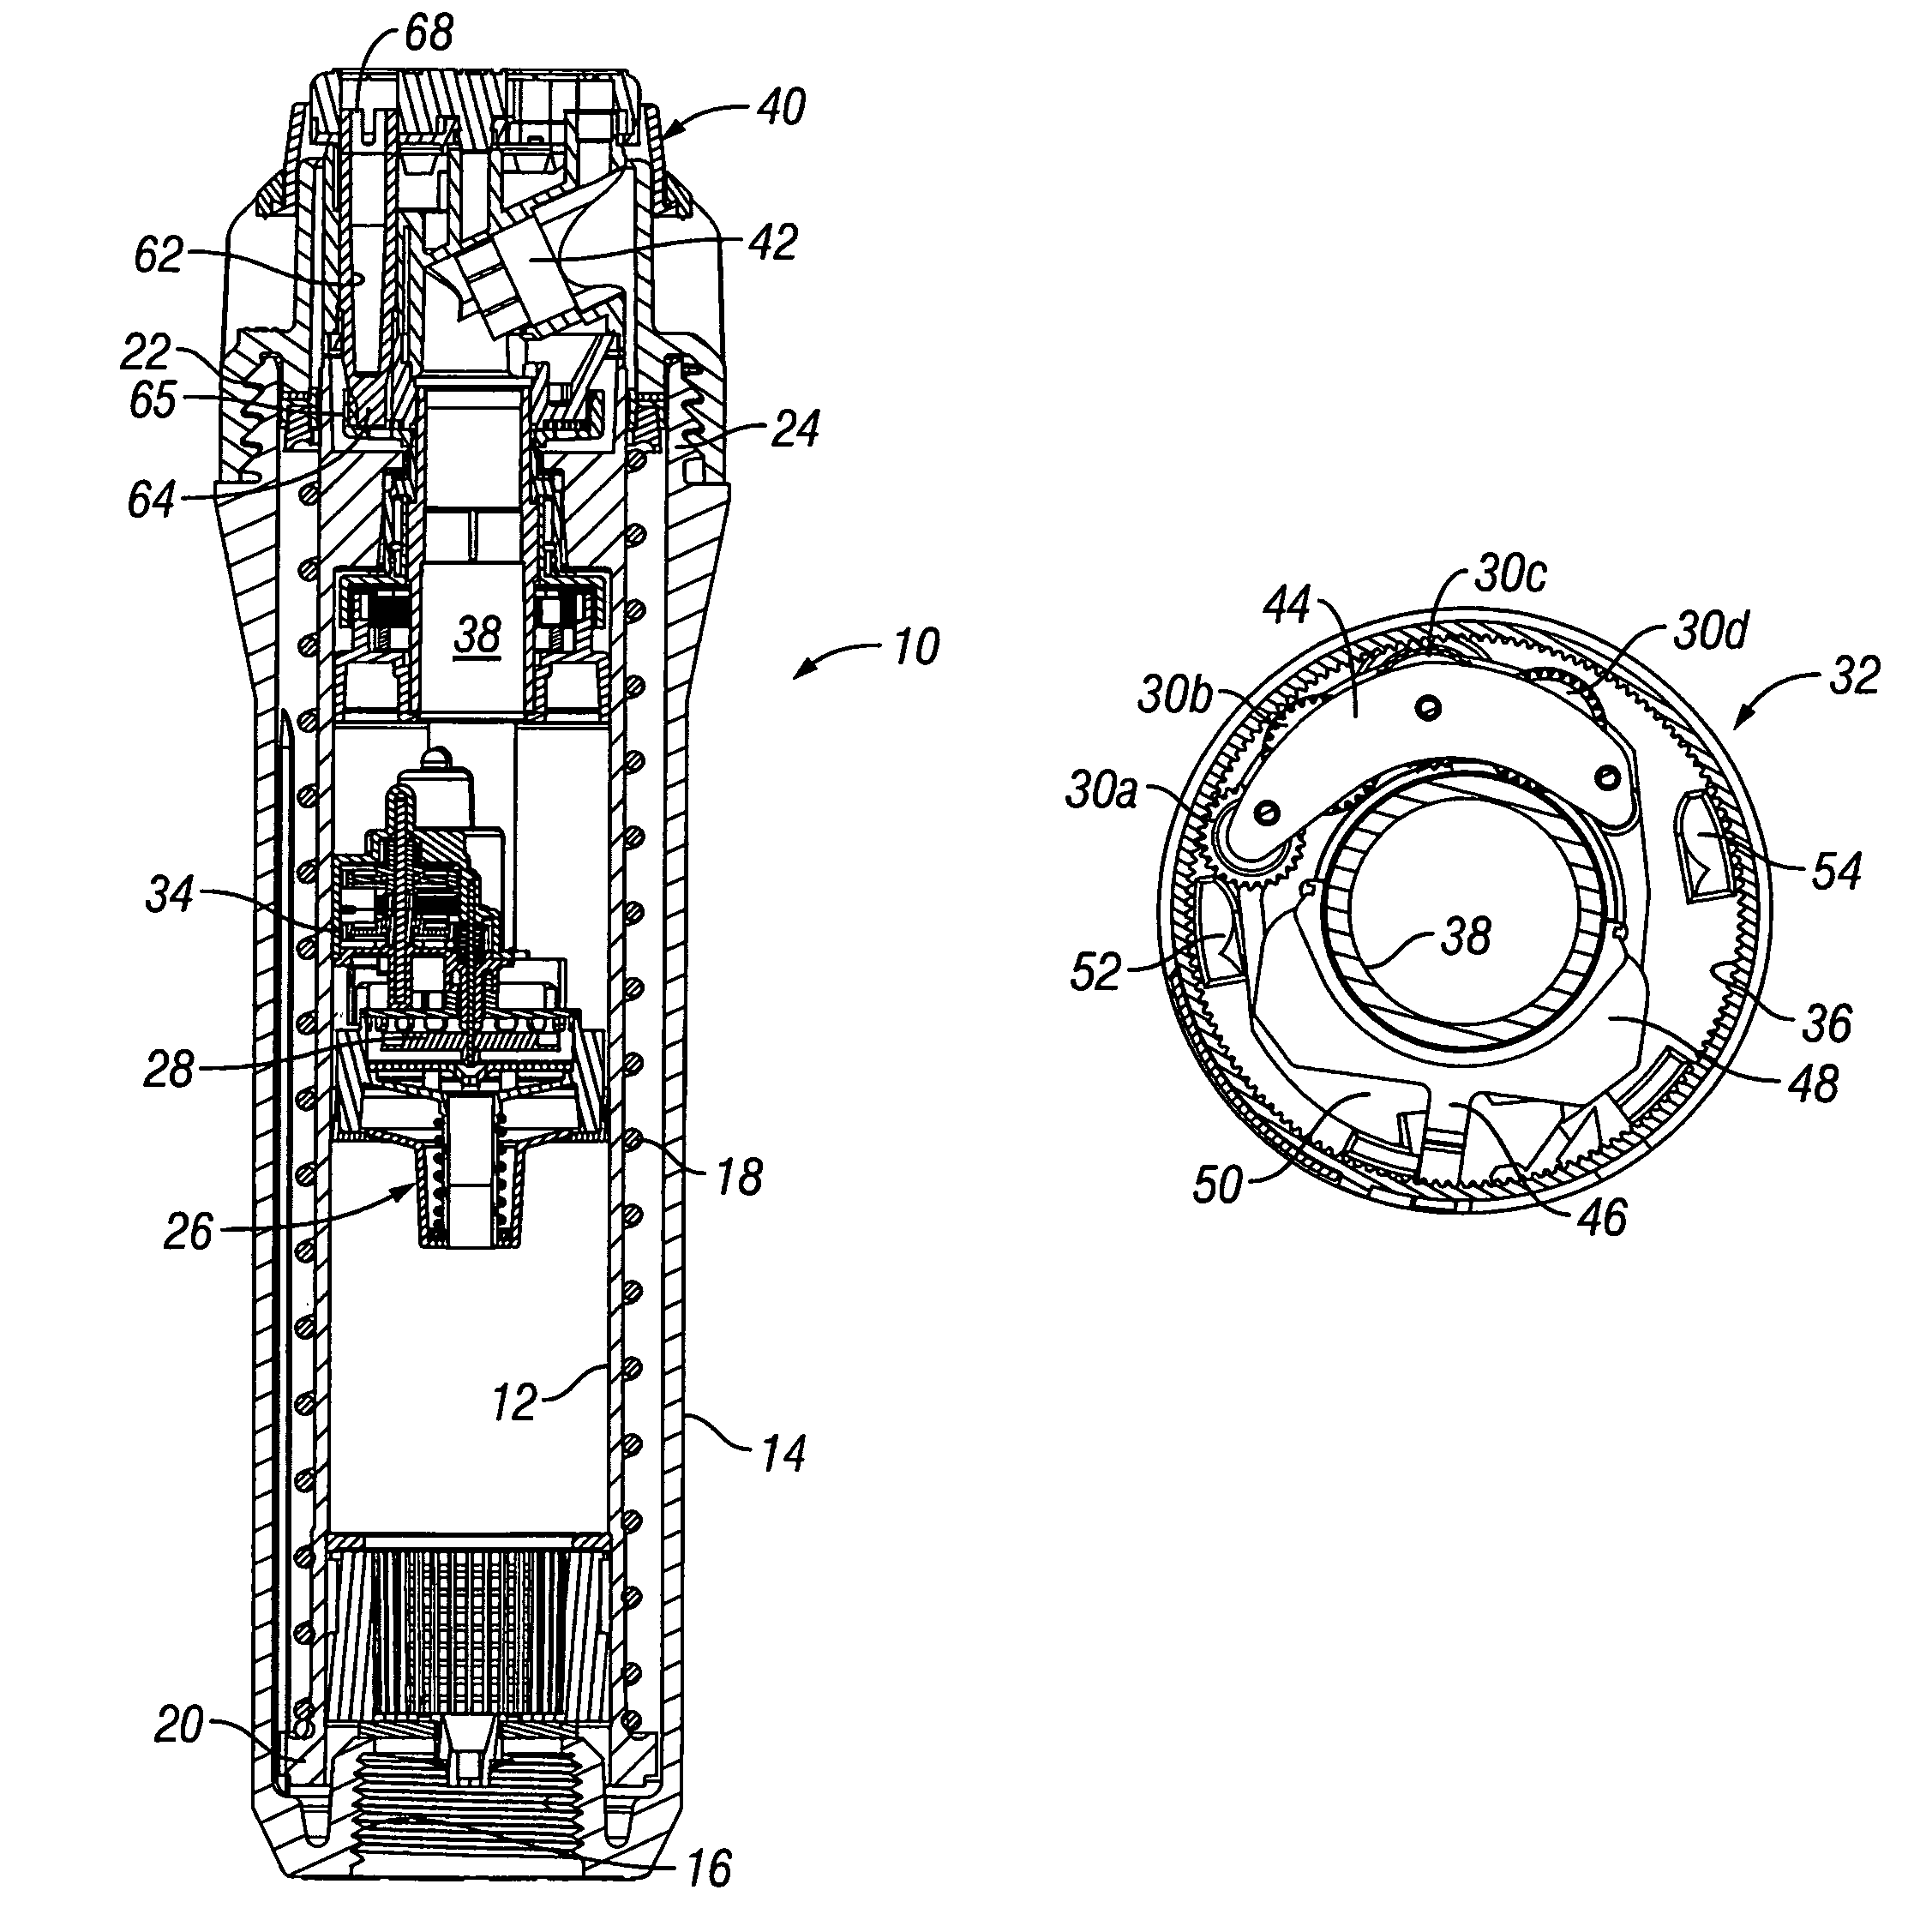 Adjustable arc rotor-type sprinkler with selectable uni-directional full circle nozzle rotation